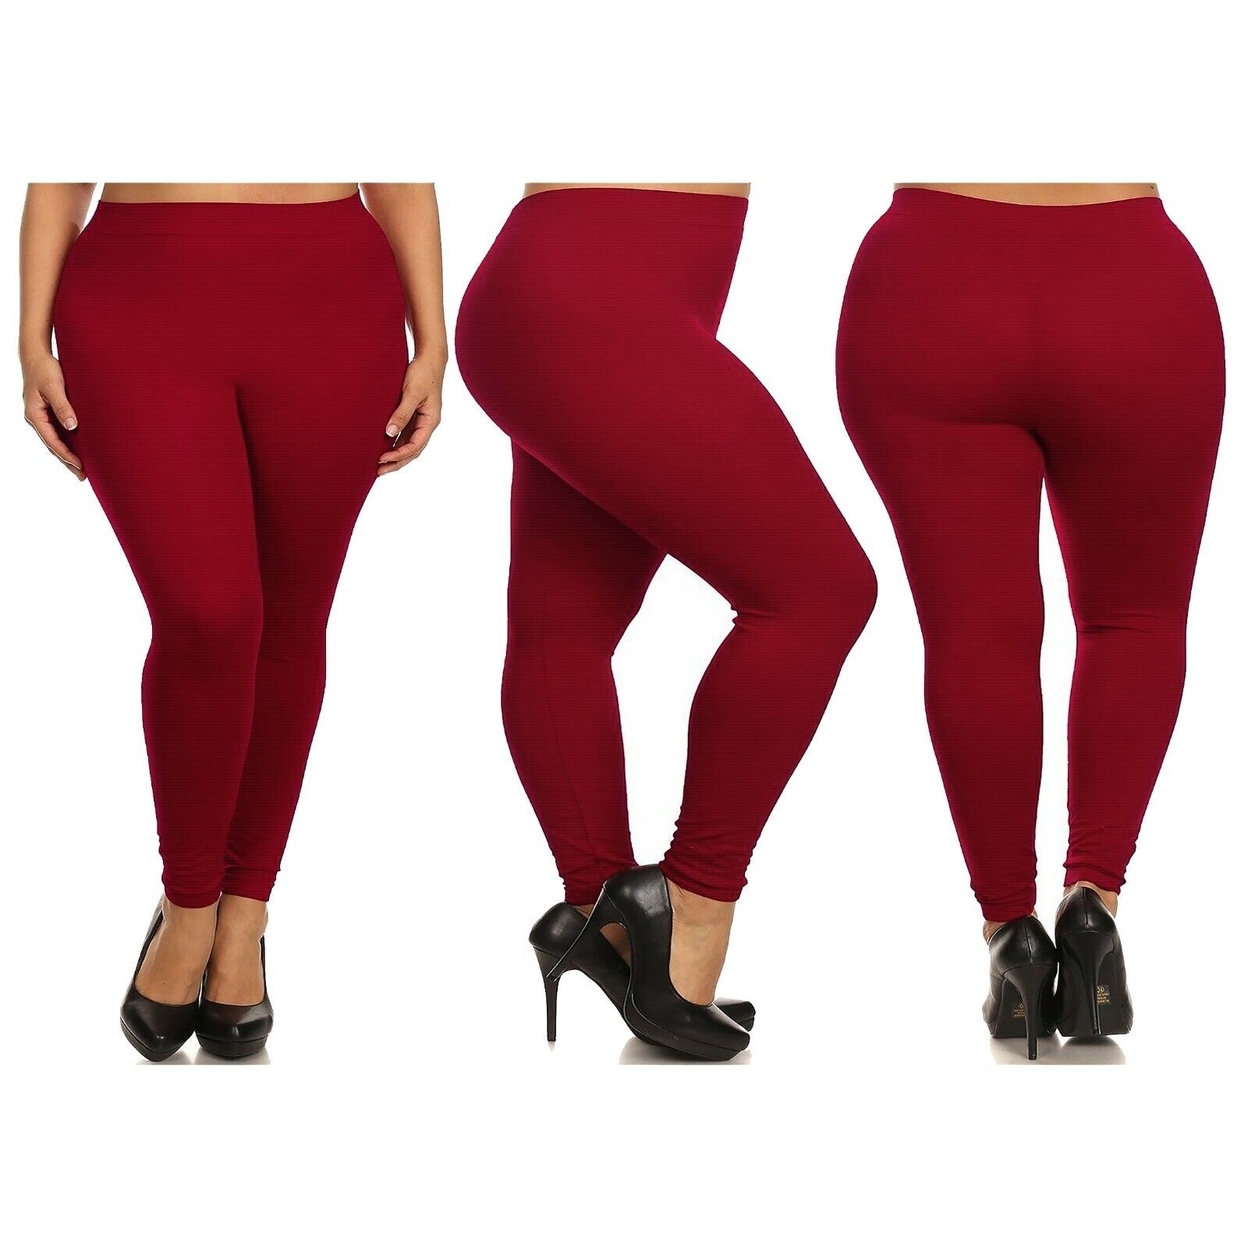 Multi-Pack: Women's Casual Ultra-Soft Smooth High Waisted Athletic Active Yoga Leggings Plus Size Available - 1-pack, 2x